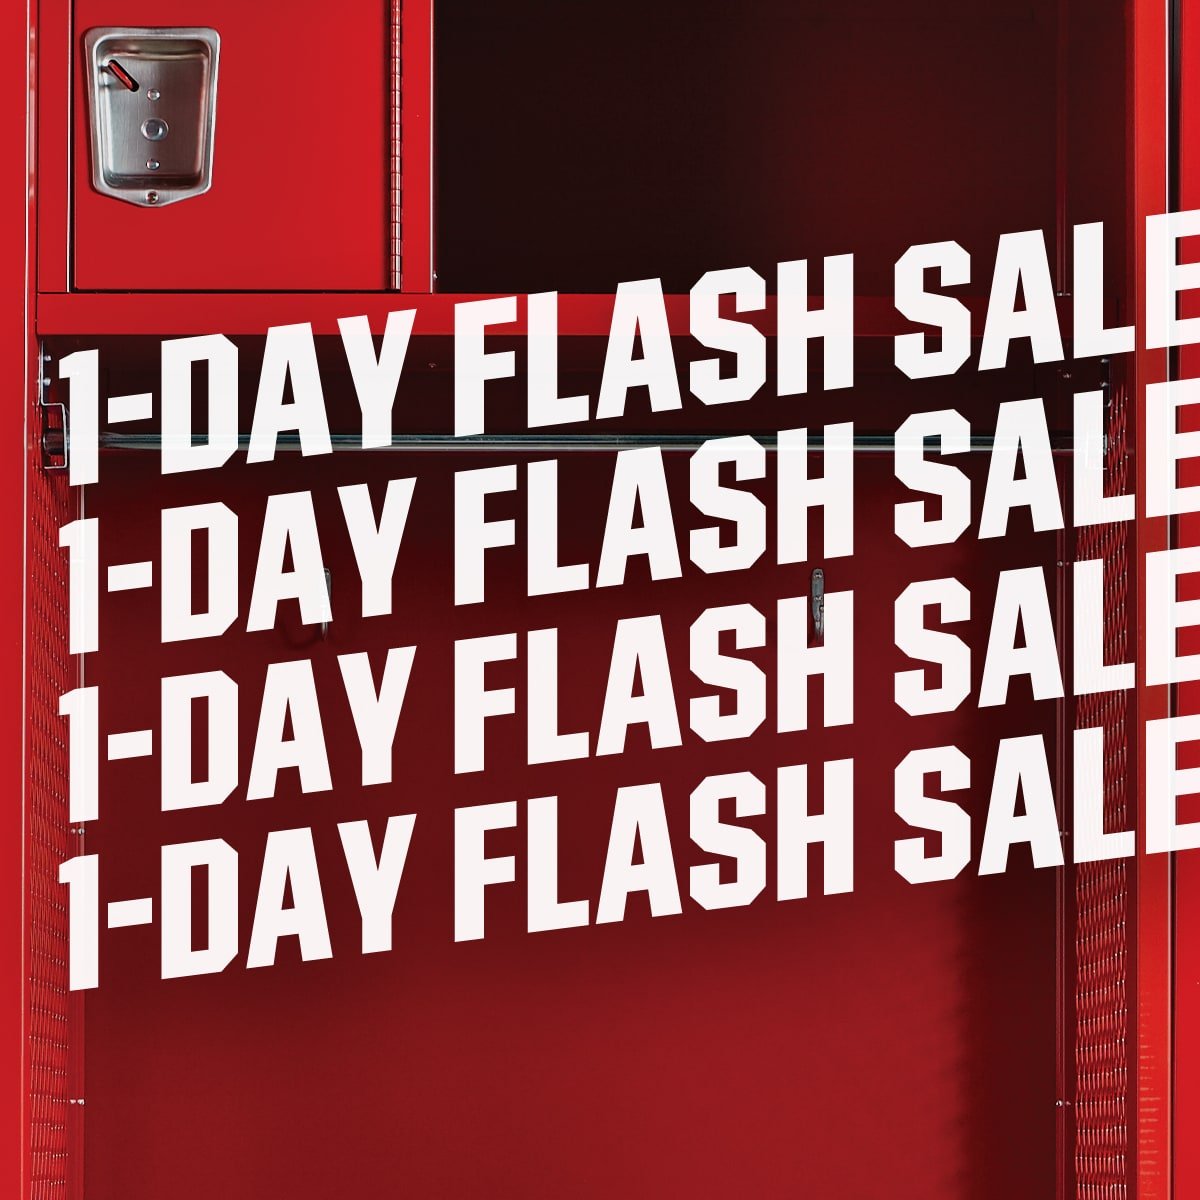 One day flash sale.